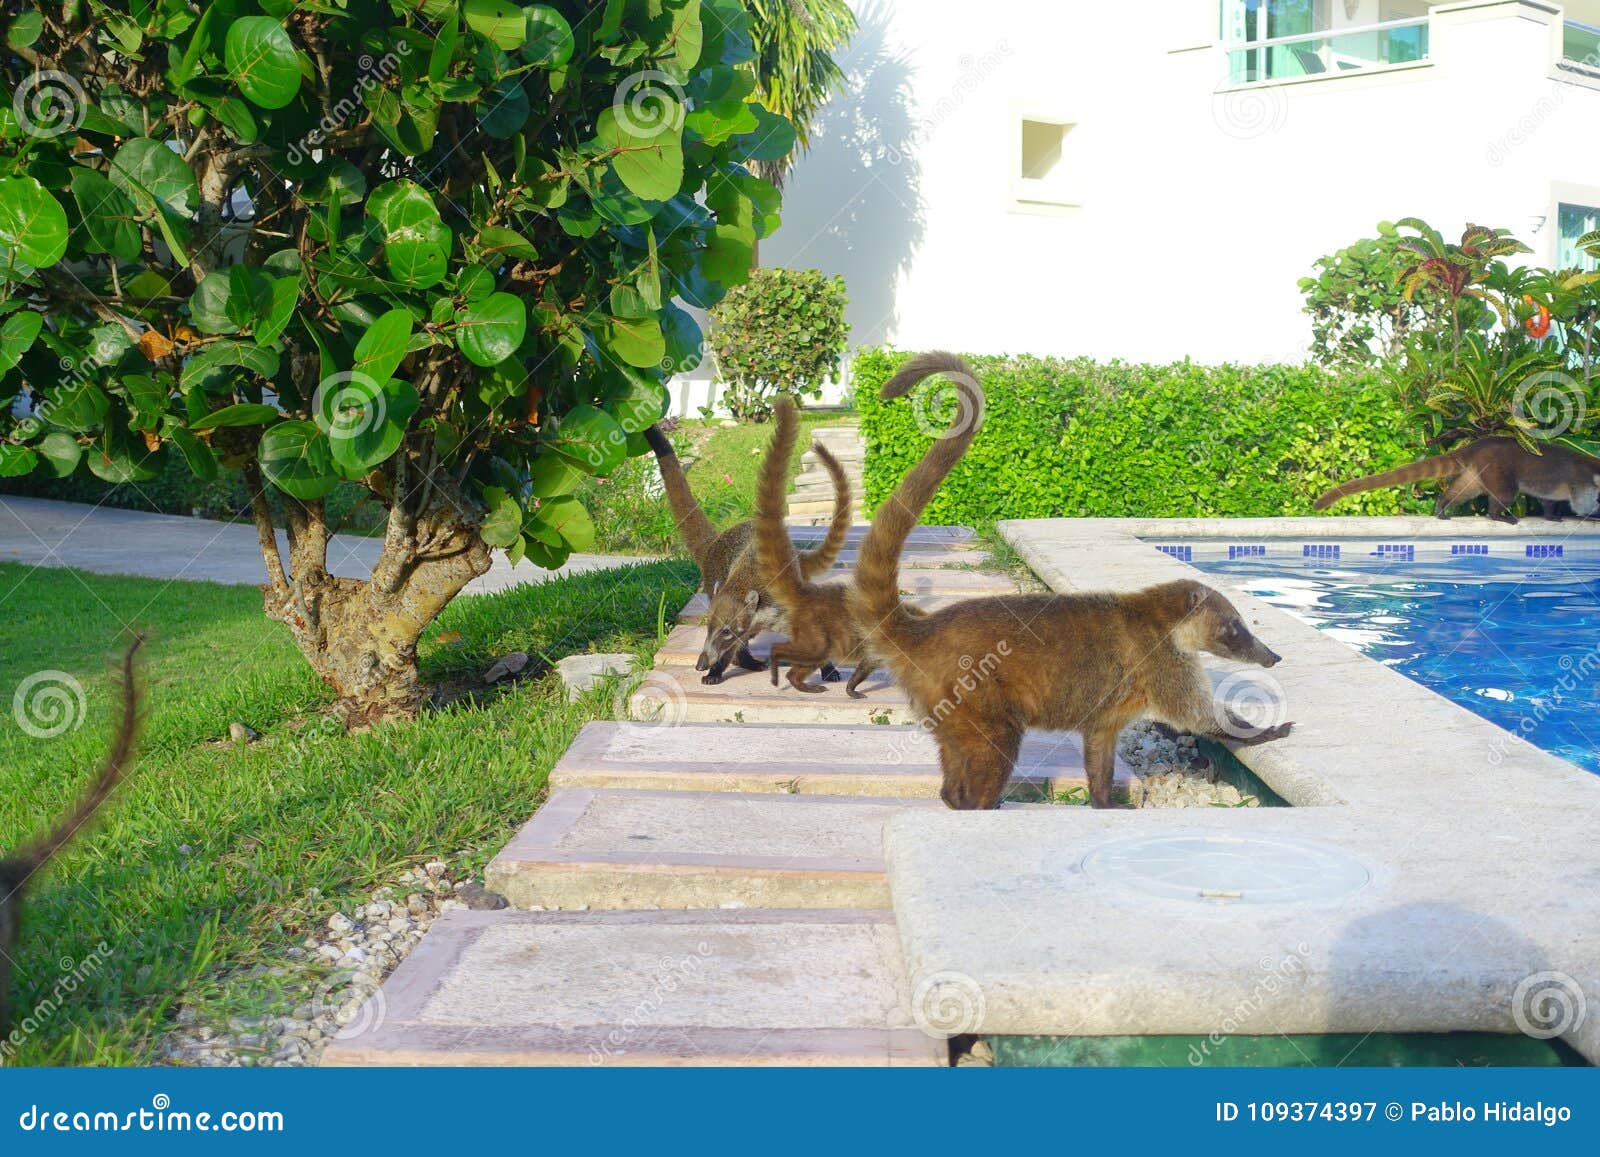 Outdoor View of Small Mammals Walking Around of a Swimming Pool Located  Inside of a Hotel in PLaya Del Carmen at Stock Image - Image of landscape,  island: 109374397